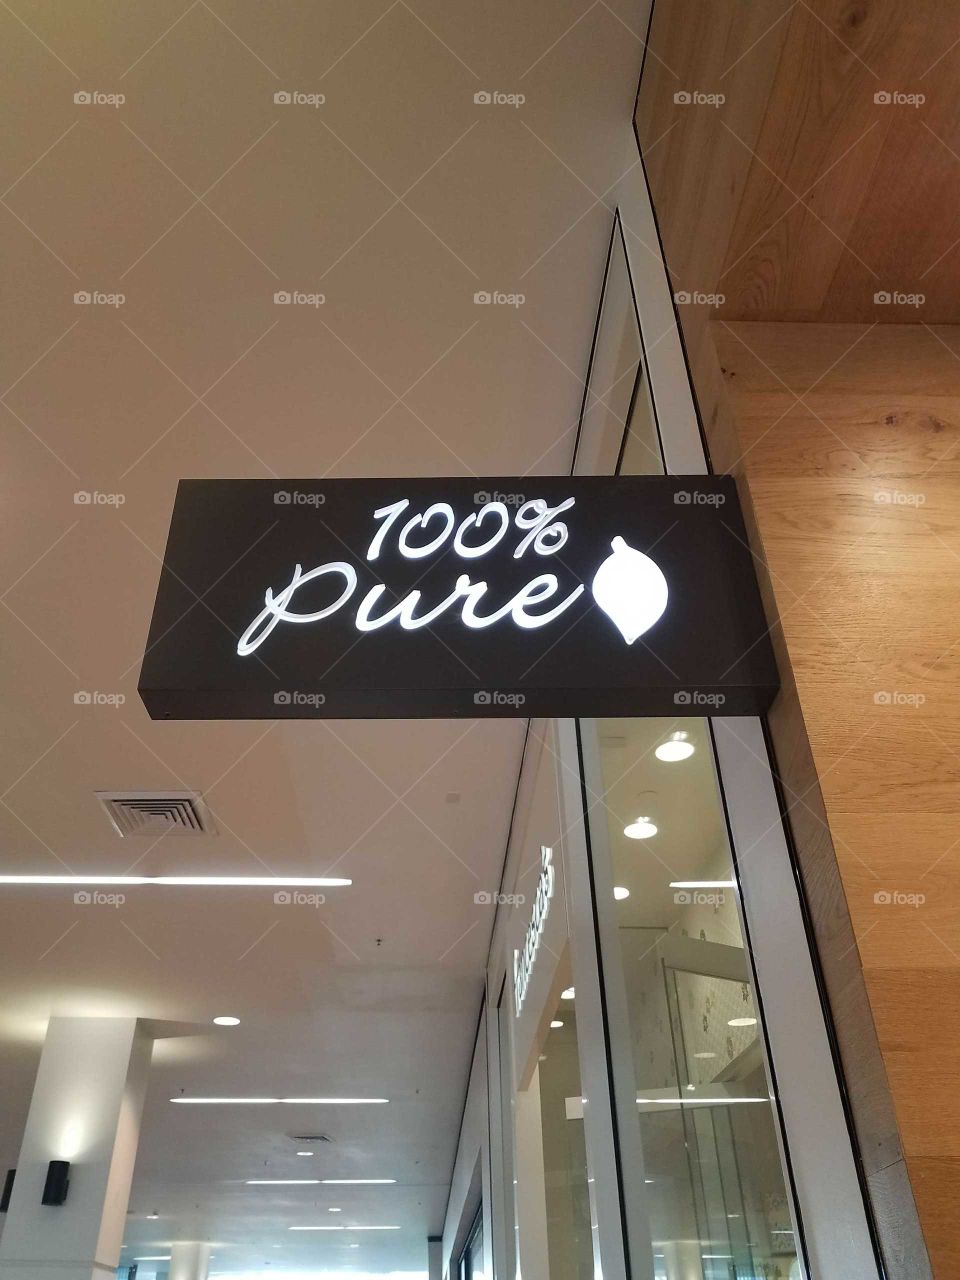 100% Pure Sign.... Perfect for memes